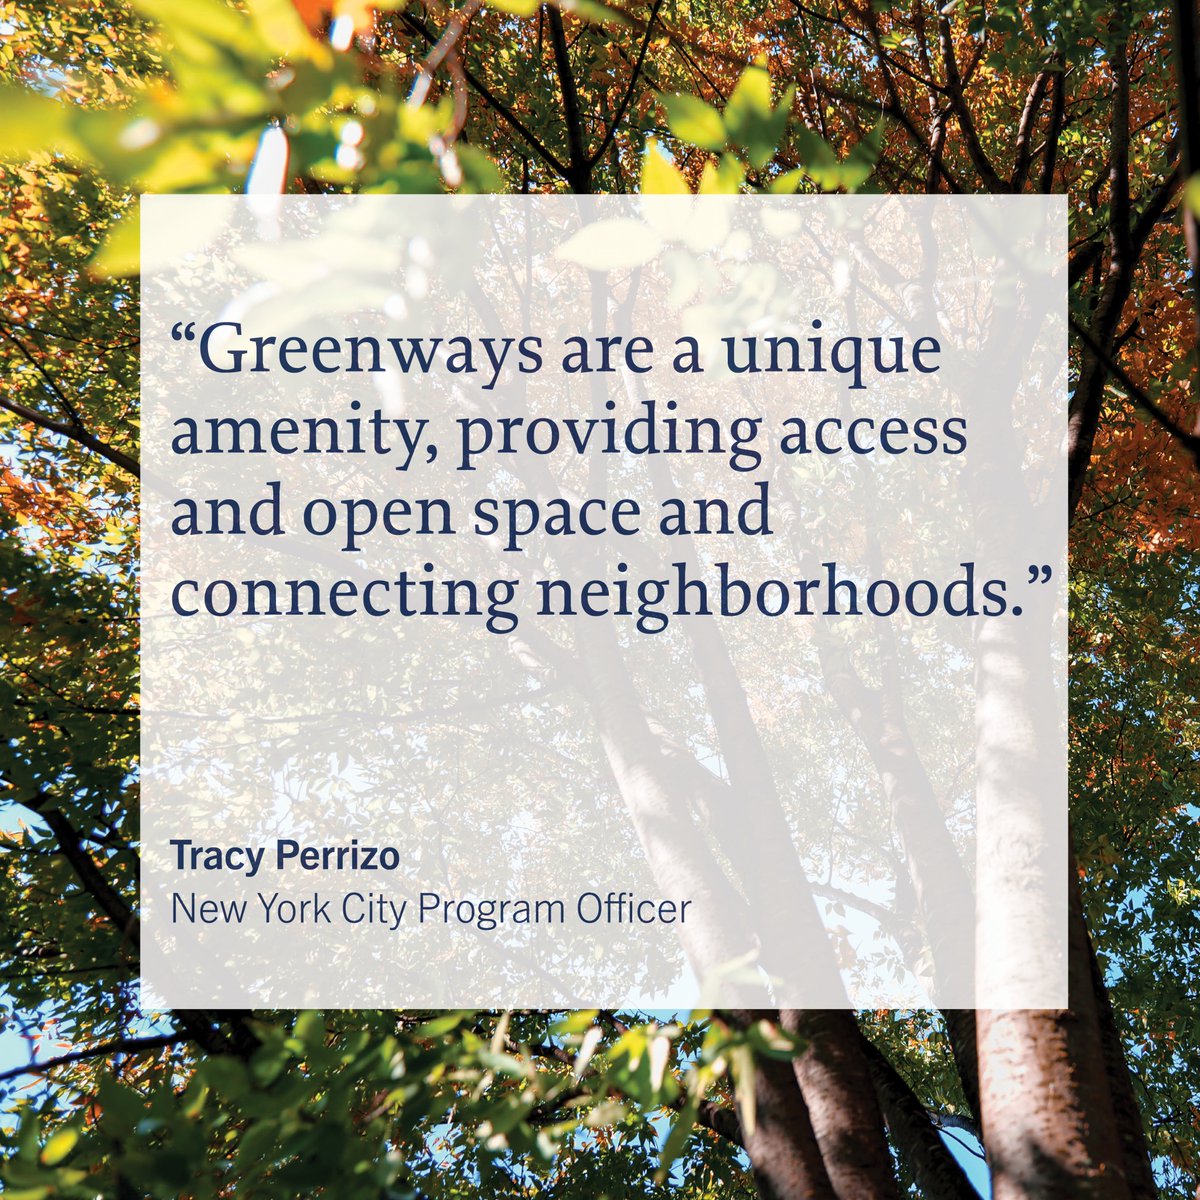 Access to healthy green space is an essential part of life for New Yorkers. Greenways give unique access to greenspace between neighborhoods. They bring together communities, provide greater access to open space, and serve as enjoyable thoroughfare. There are currently 150 miles…